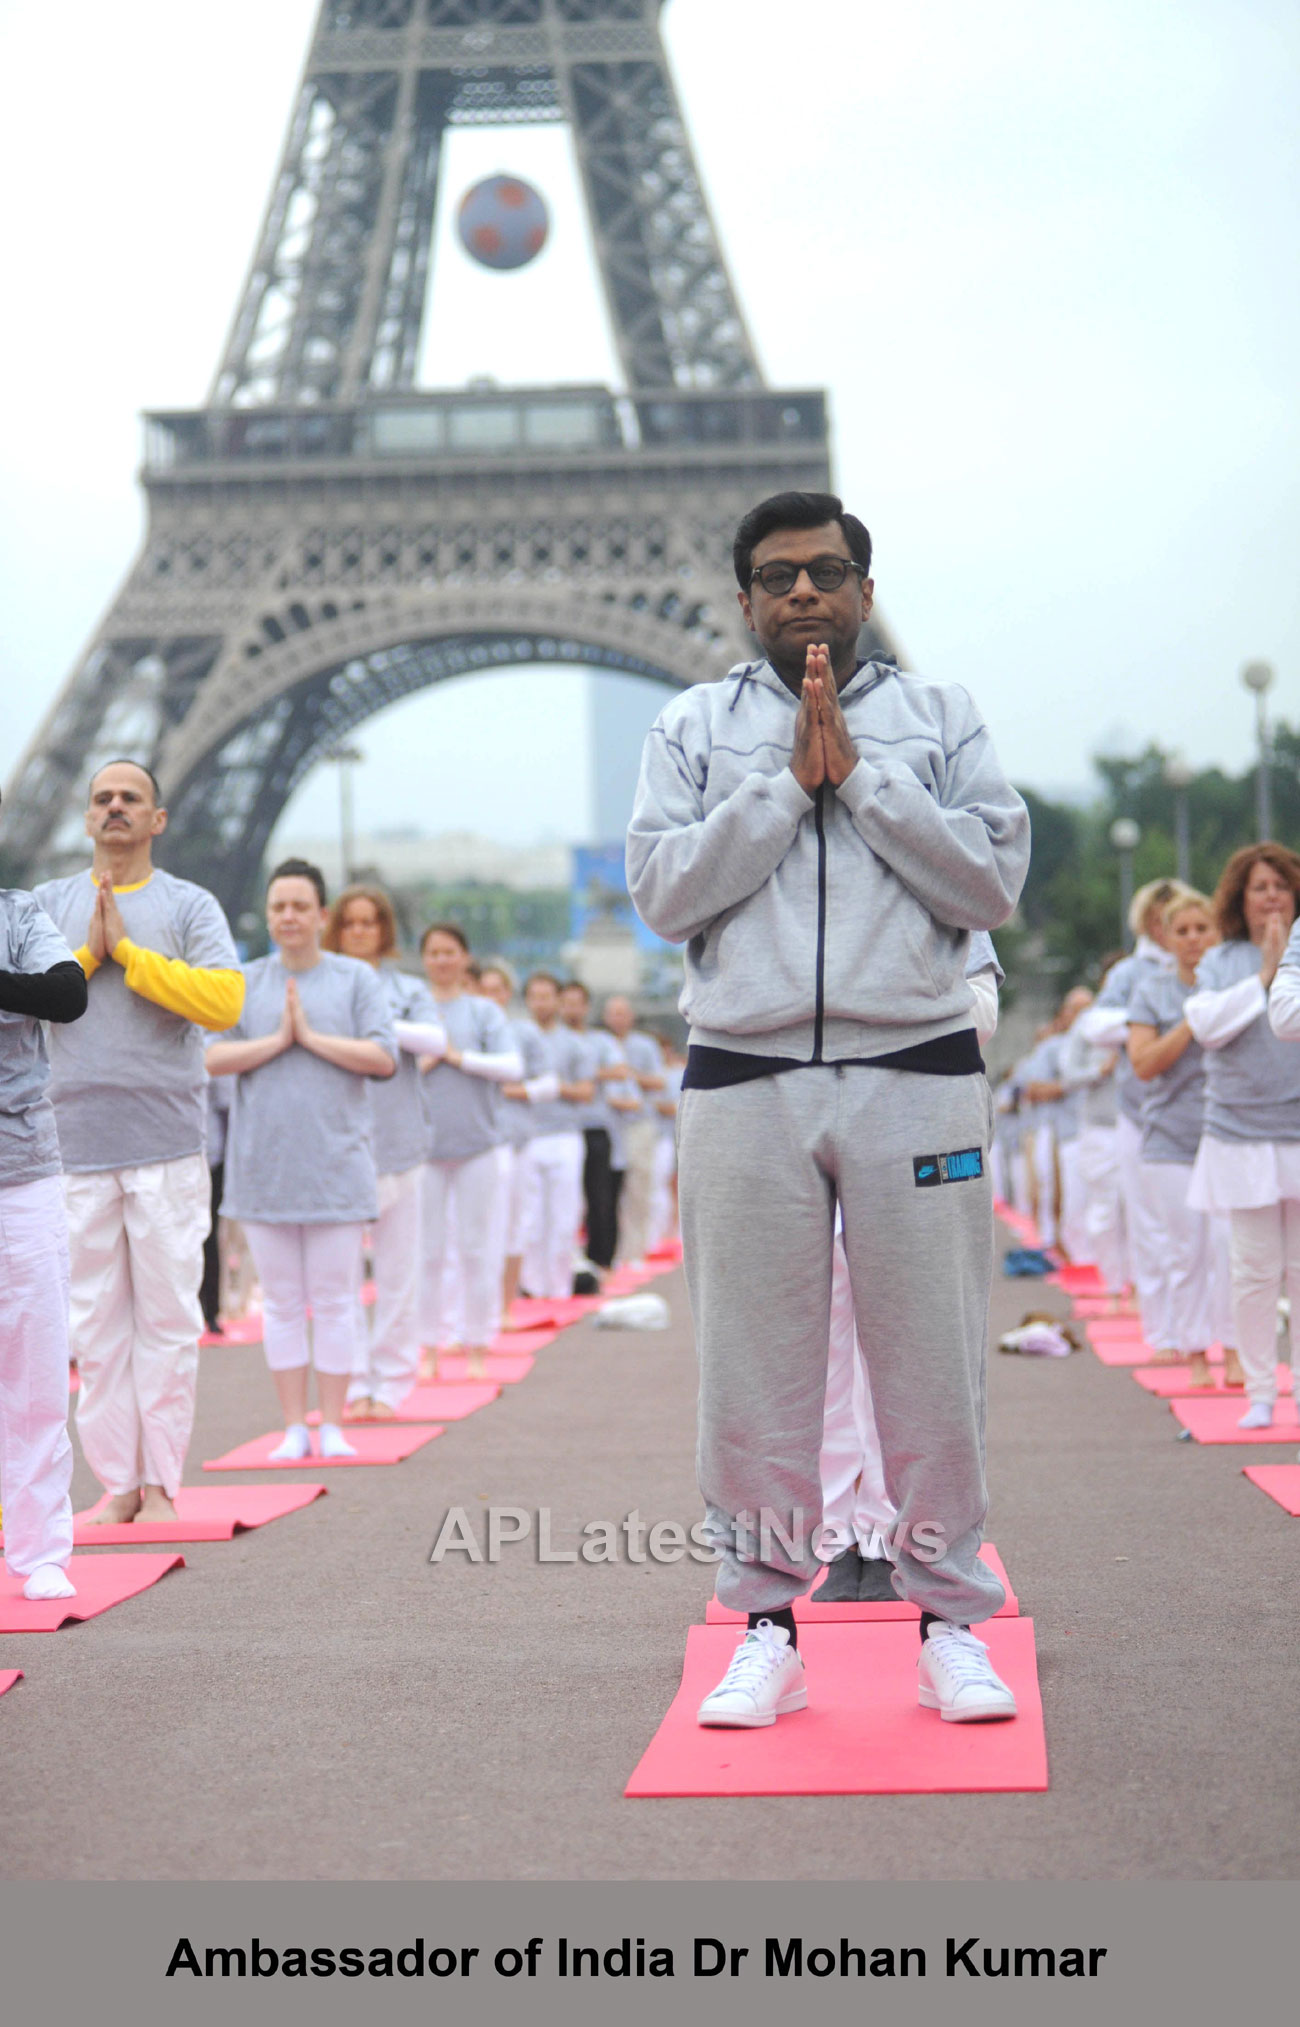 Euro Cup and Yoga Festival at Eiffel Tower Rocked Paris - Picture 8